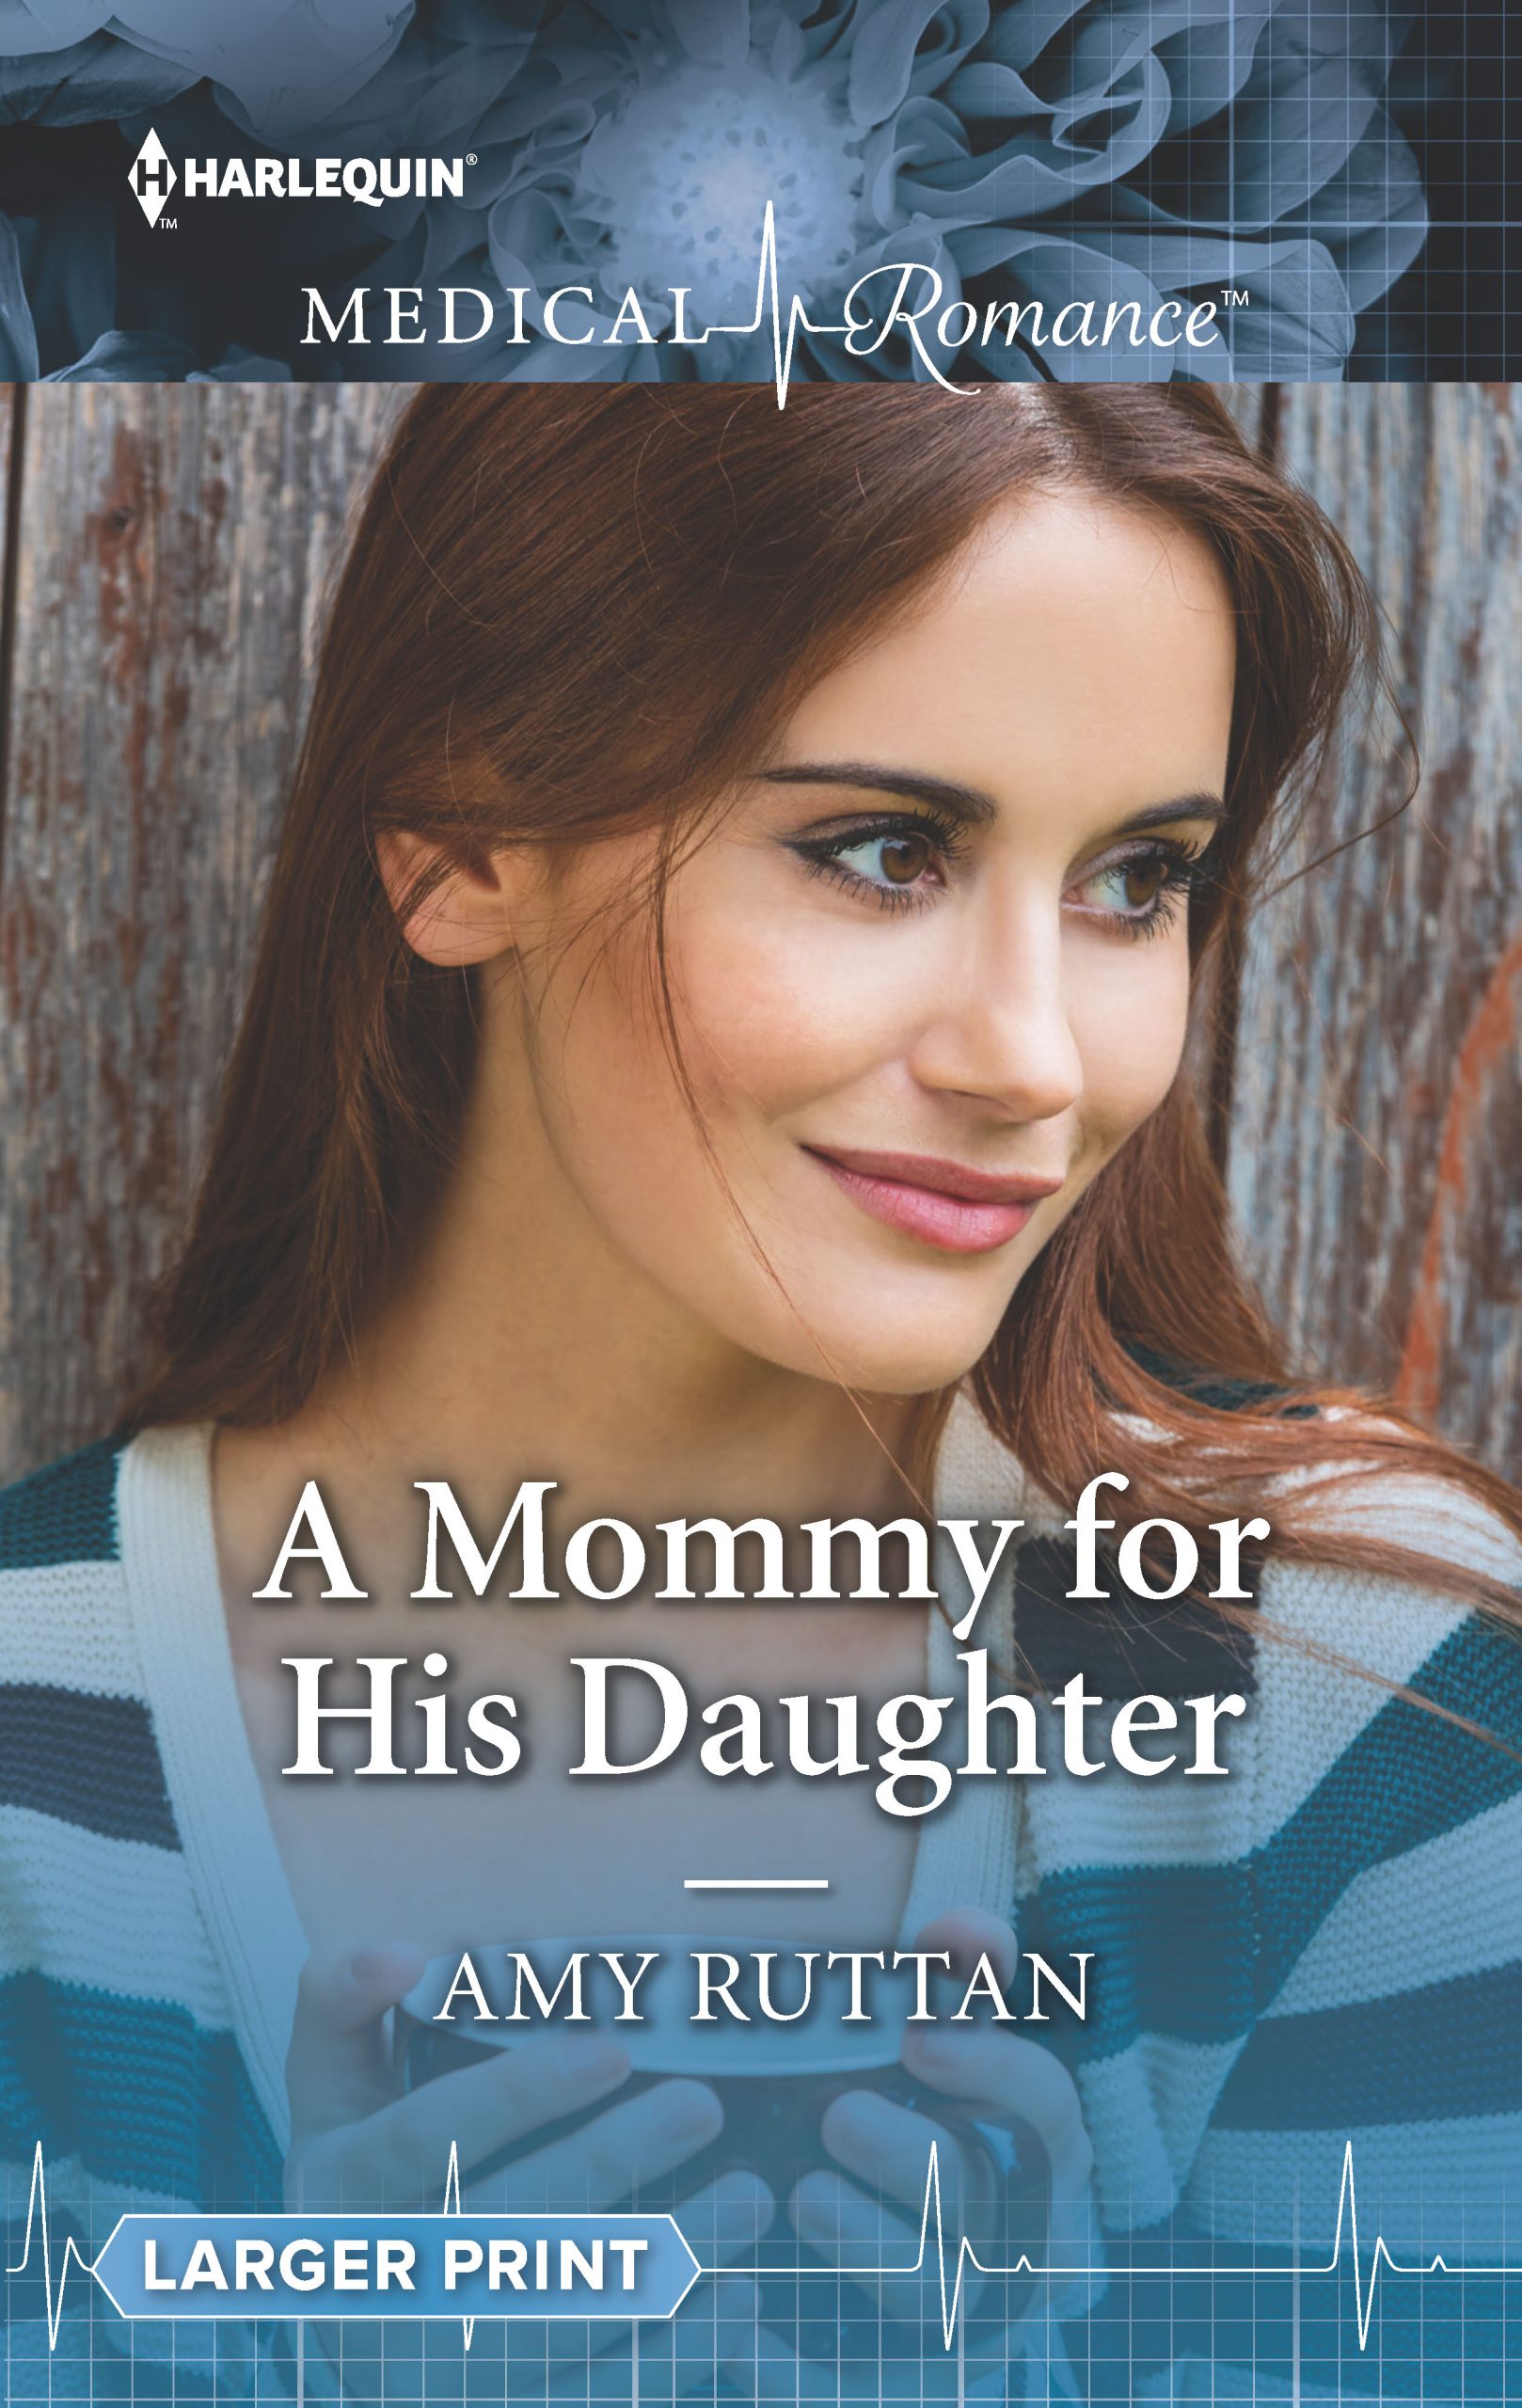 Book Cover for A Mommy for His Daughter by Amy Ruttan